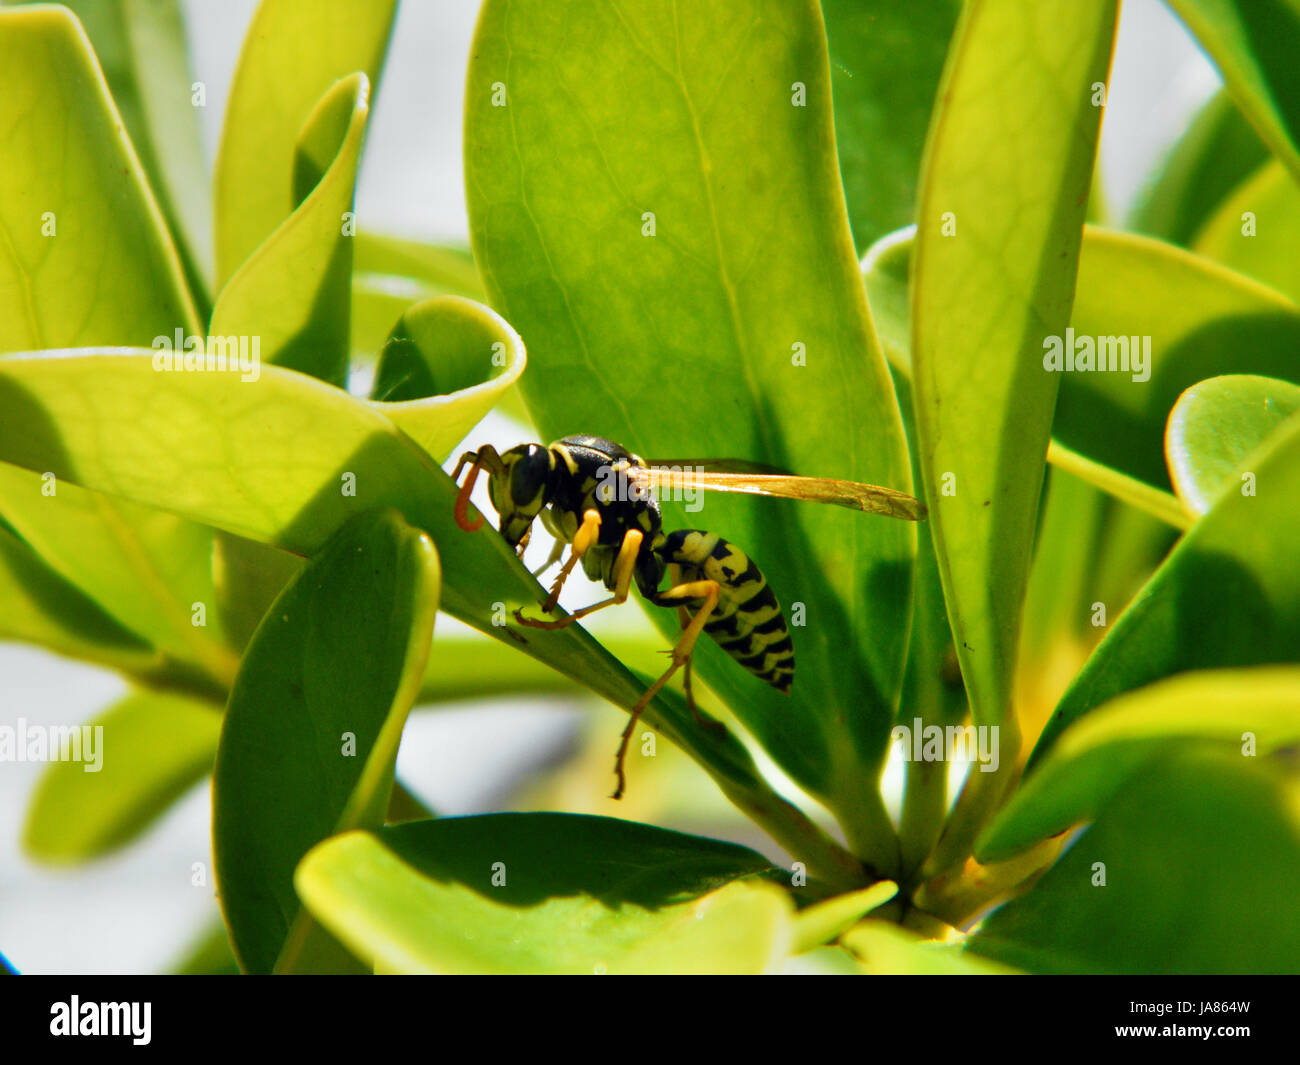 insect,wasp,sting,poison,allergy,articulate animal,hautflgler,papierwespe Stock Photo